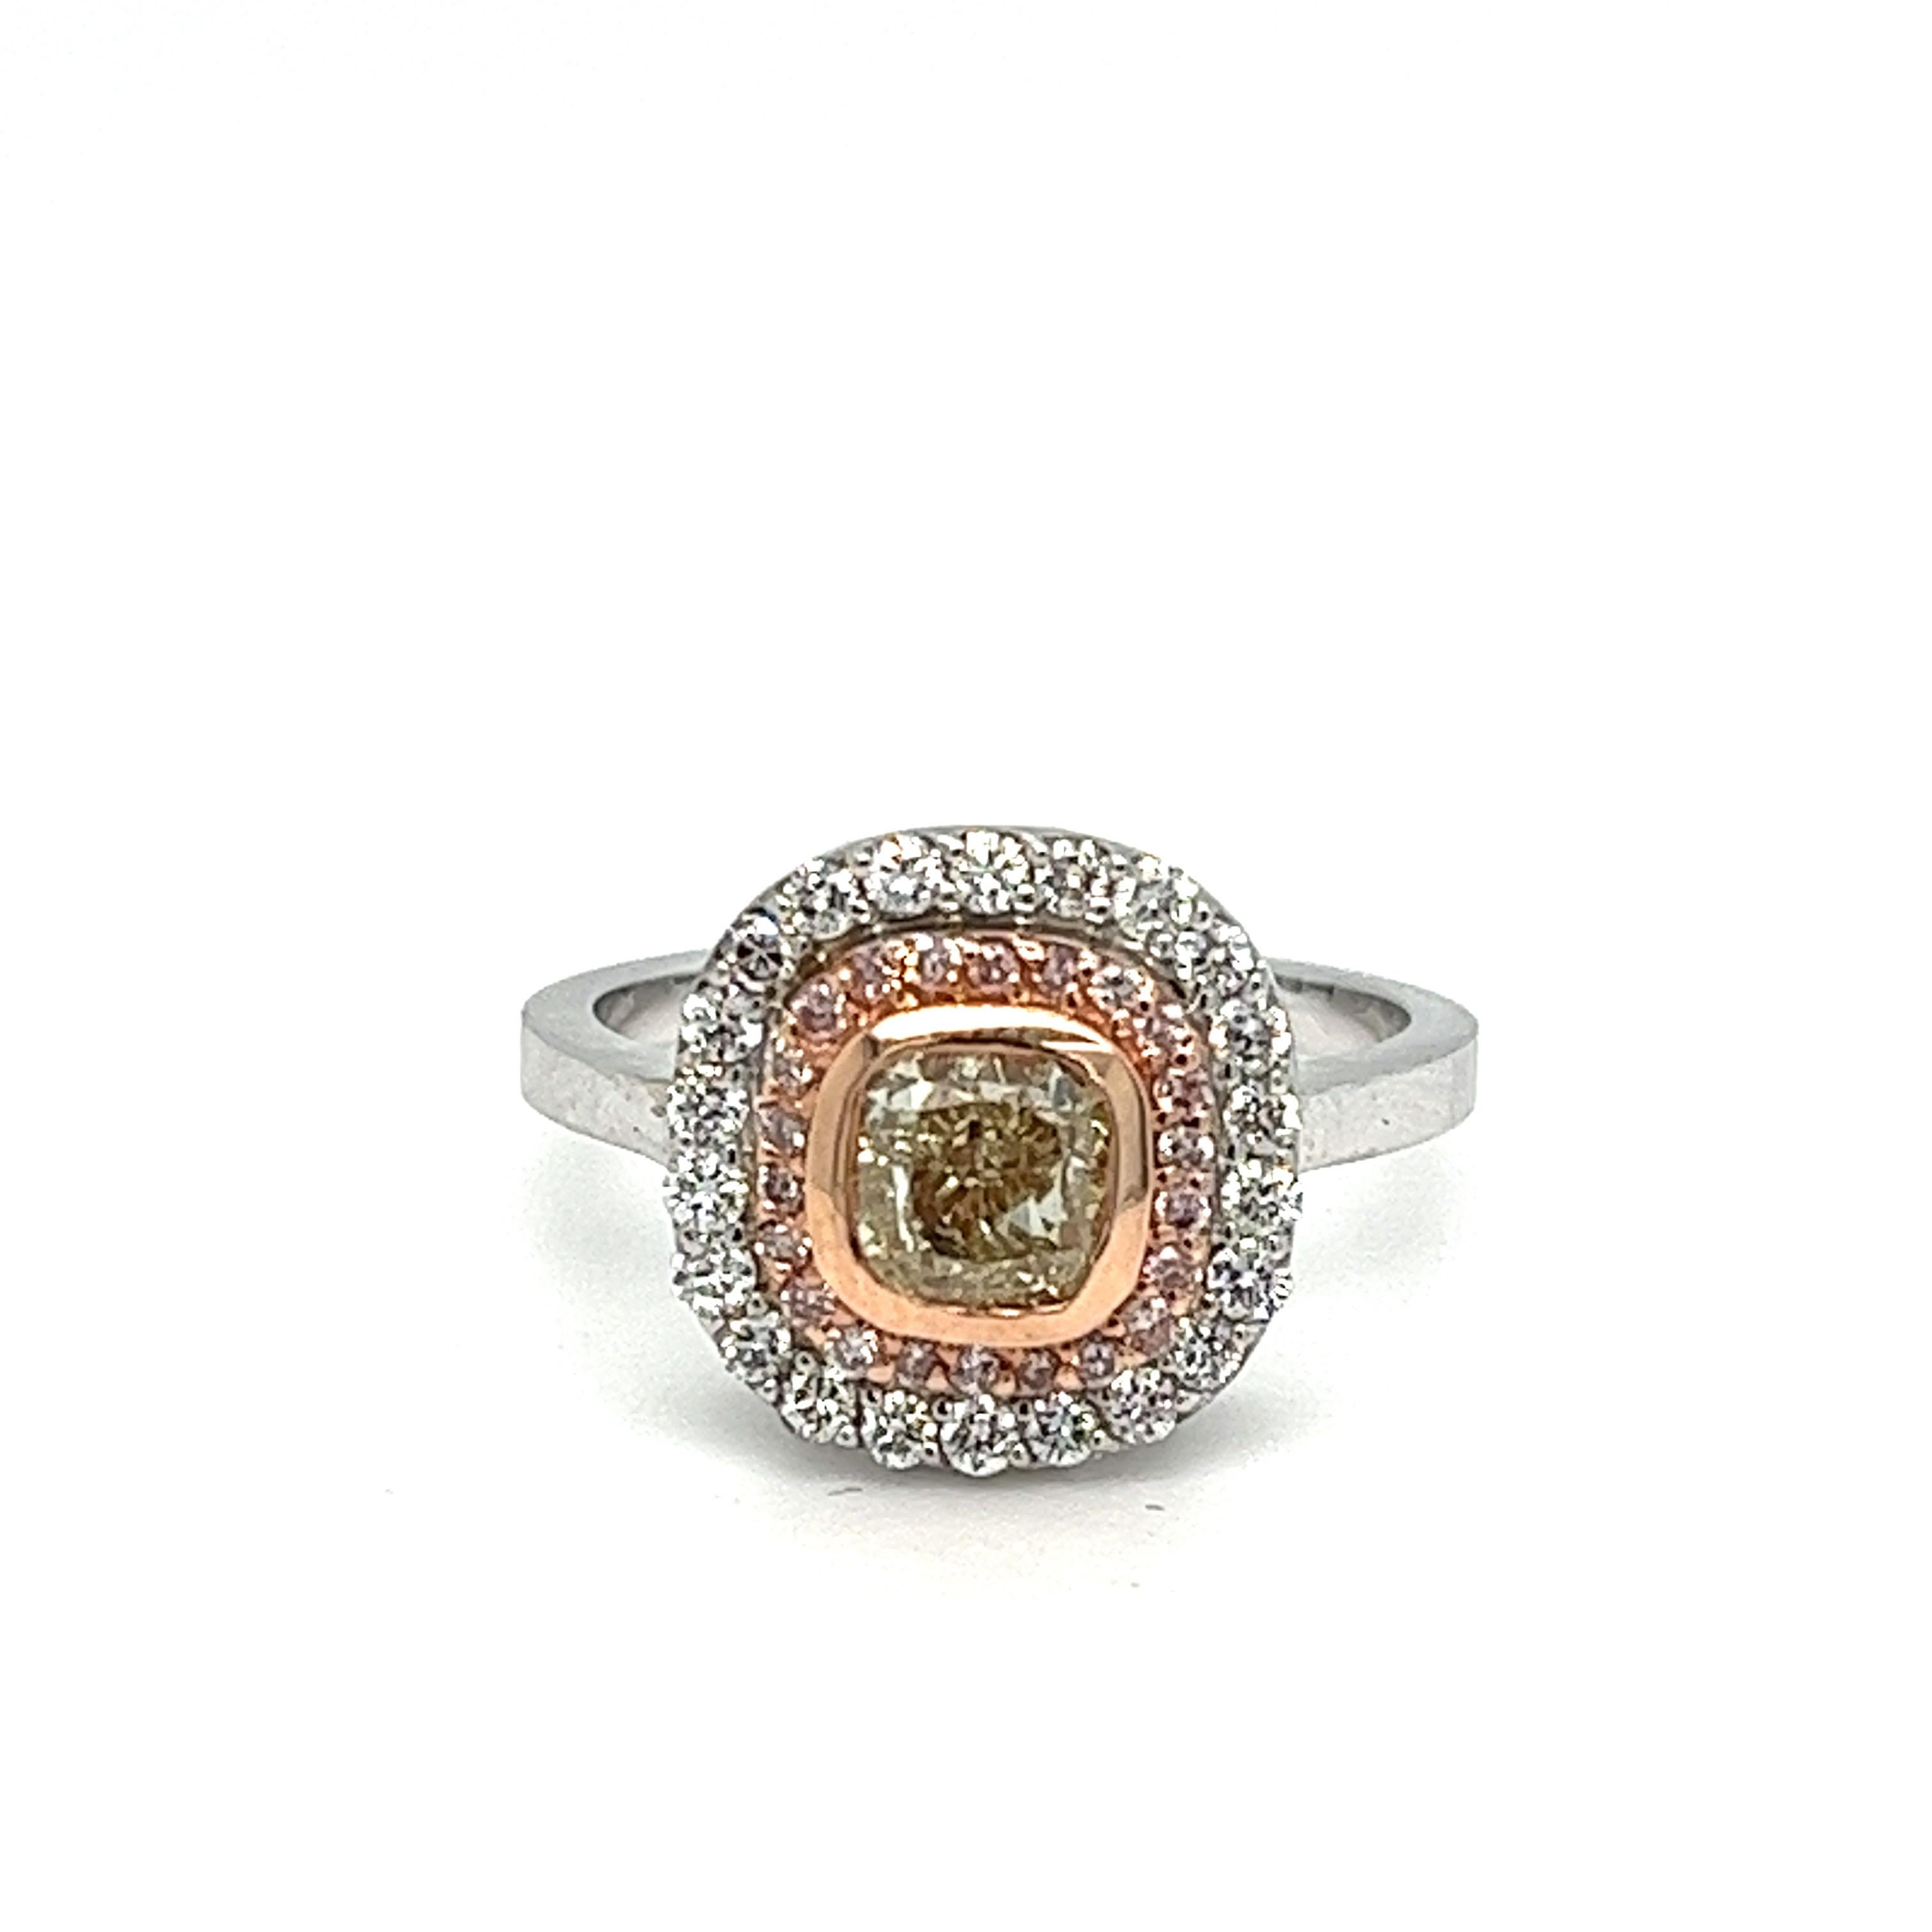 Offered here is a Stunning 1.66 Carats total weight Natural Earth Mined Yellow, Pink, and White Diamond Ring

Description:
This exquisite, one-of-a-kind ring showcases the breathtaking allure of natural earth mined diamonds. The centerpiece is a